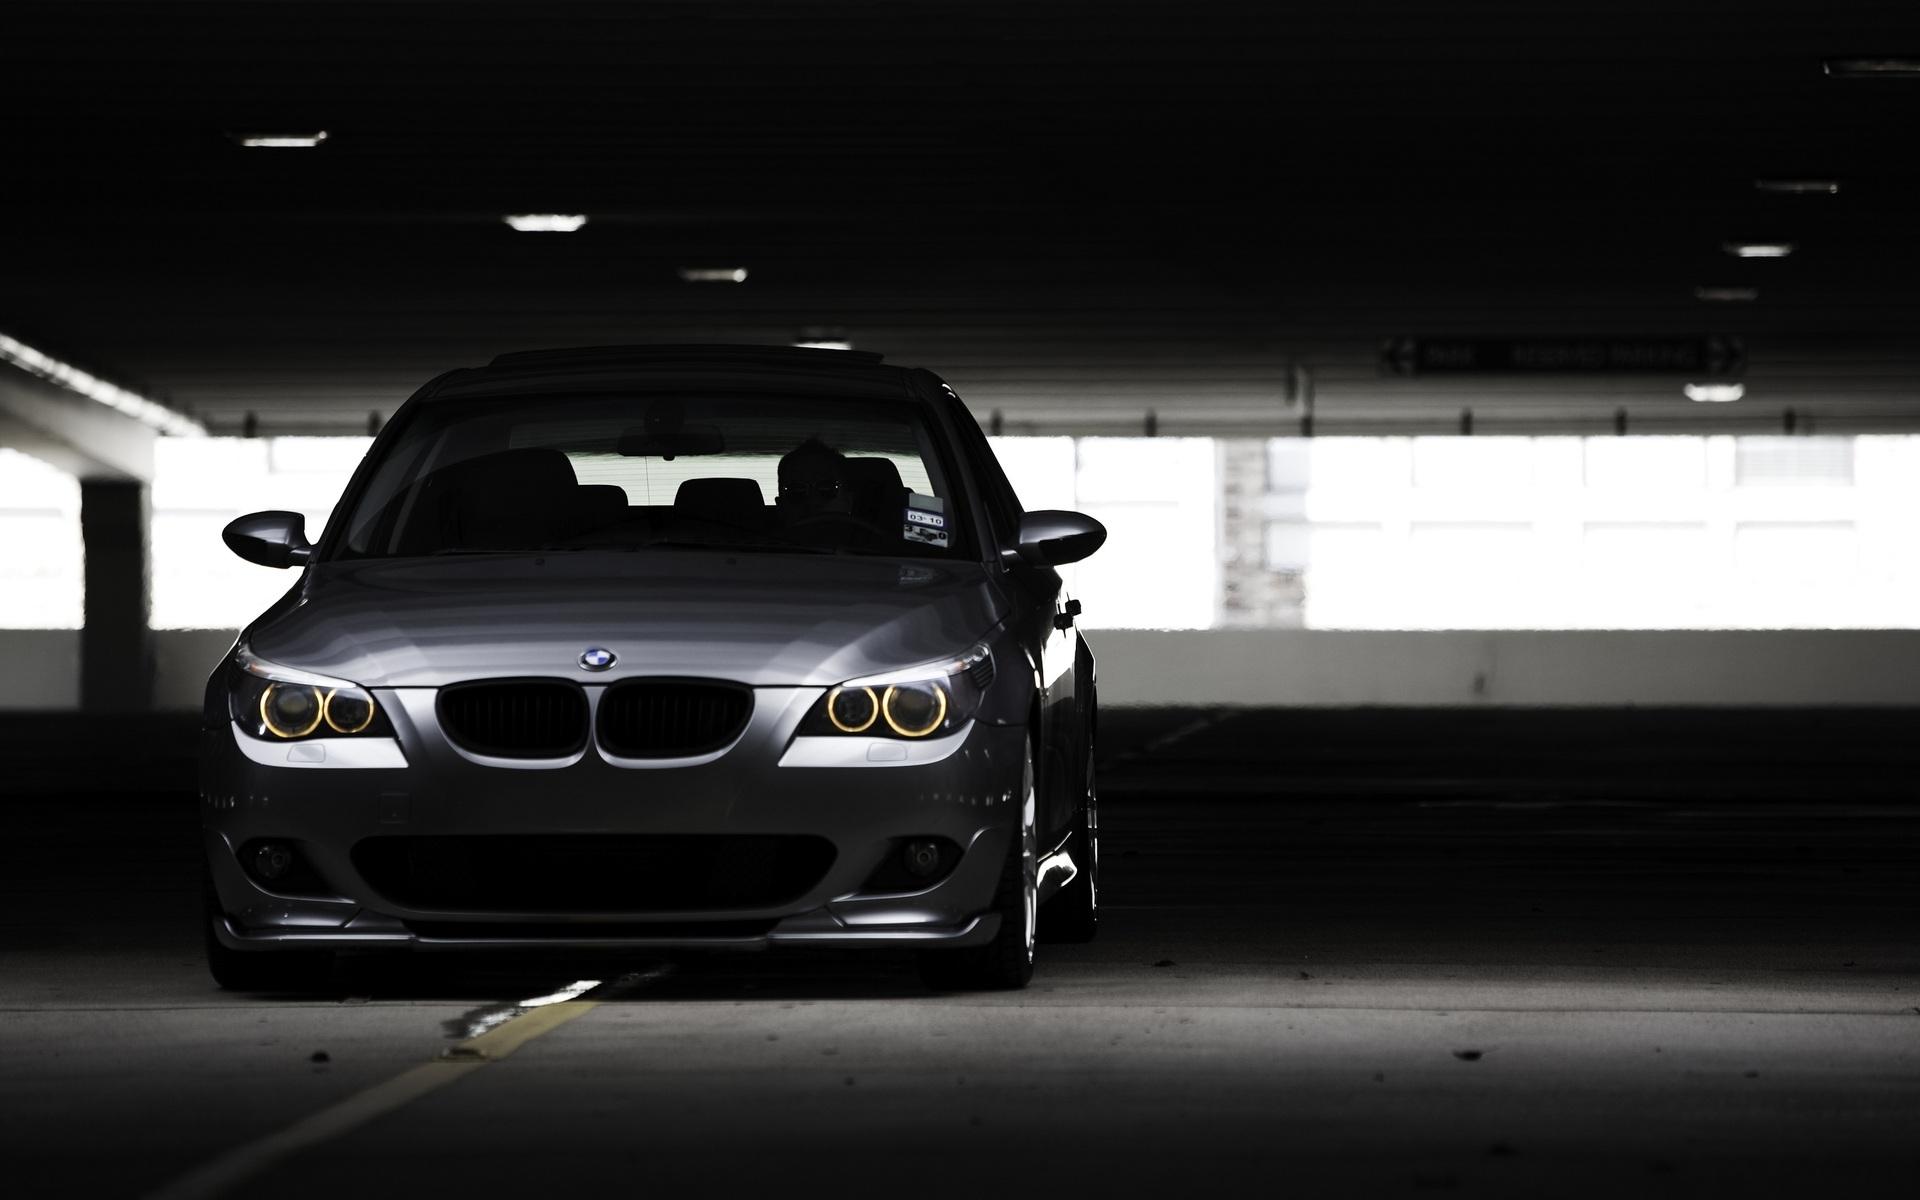 Bmw E60 Wallpapers Top Free Bmw E60 Backgrounds Wallpaperaccess